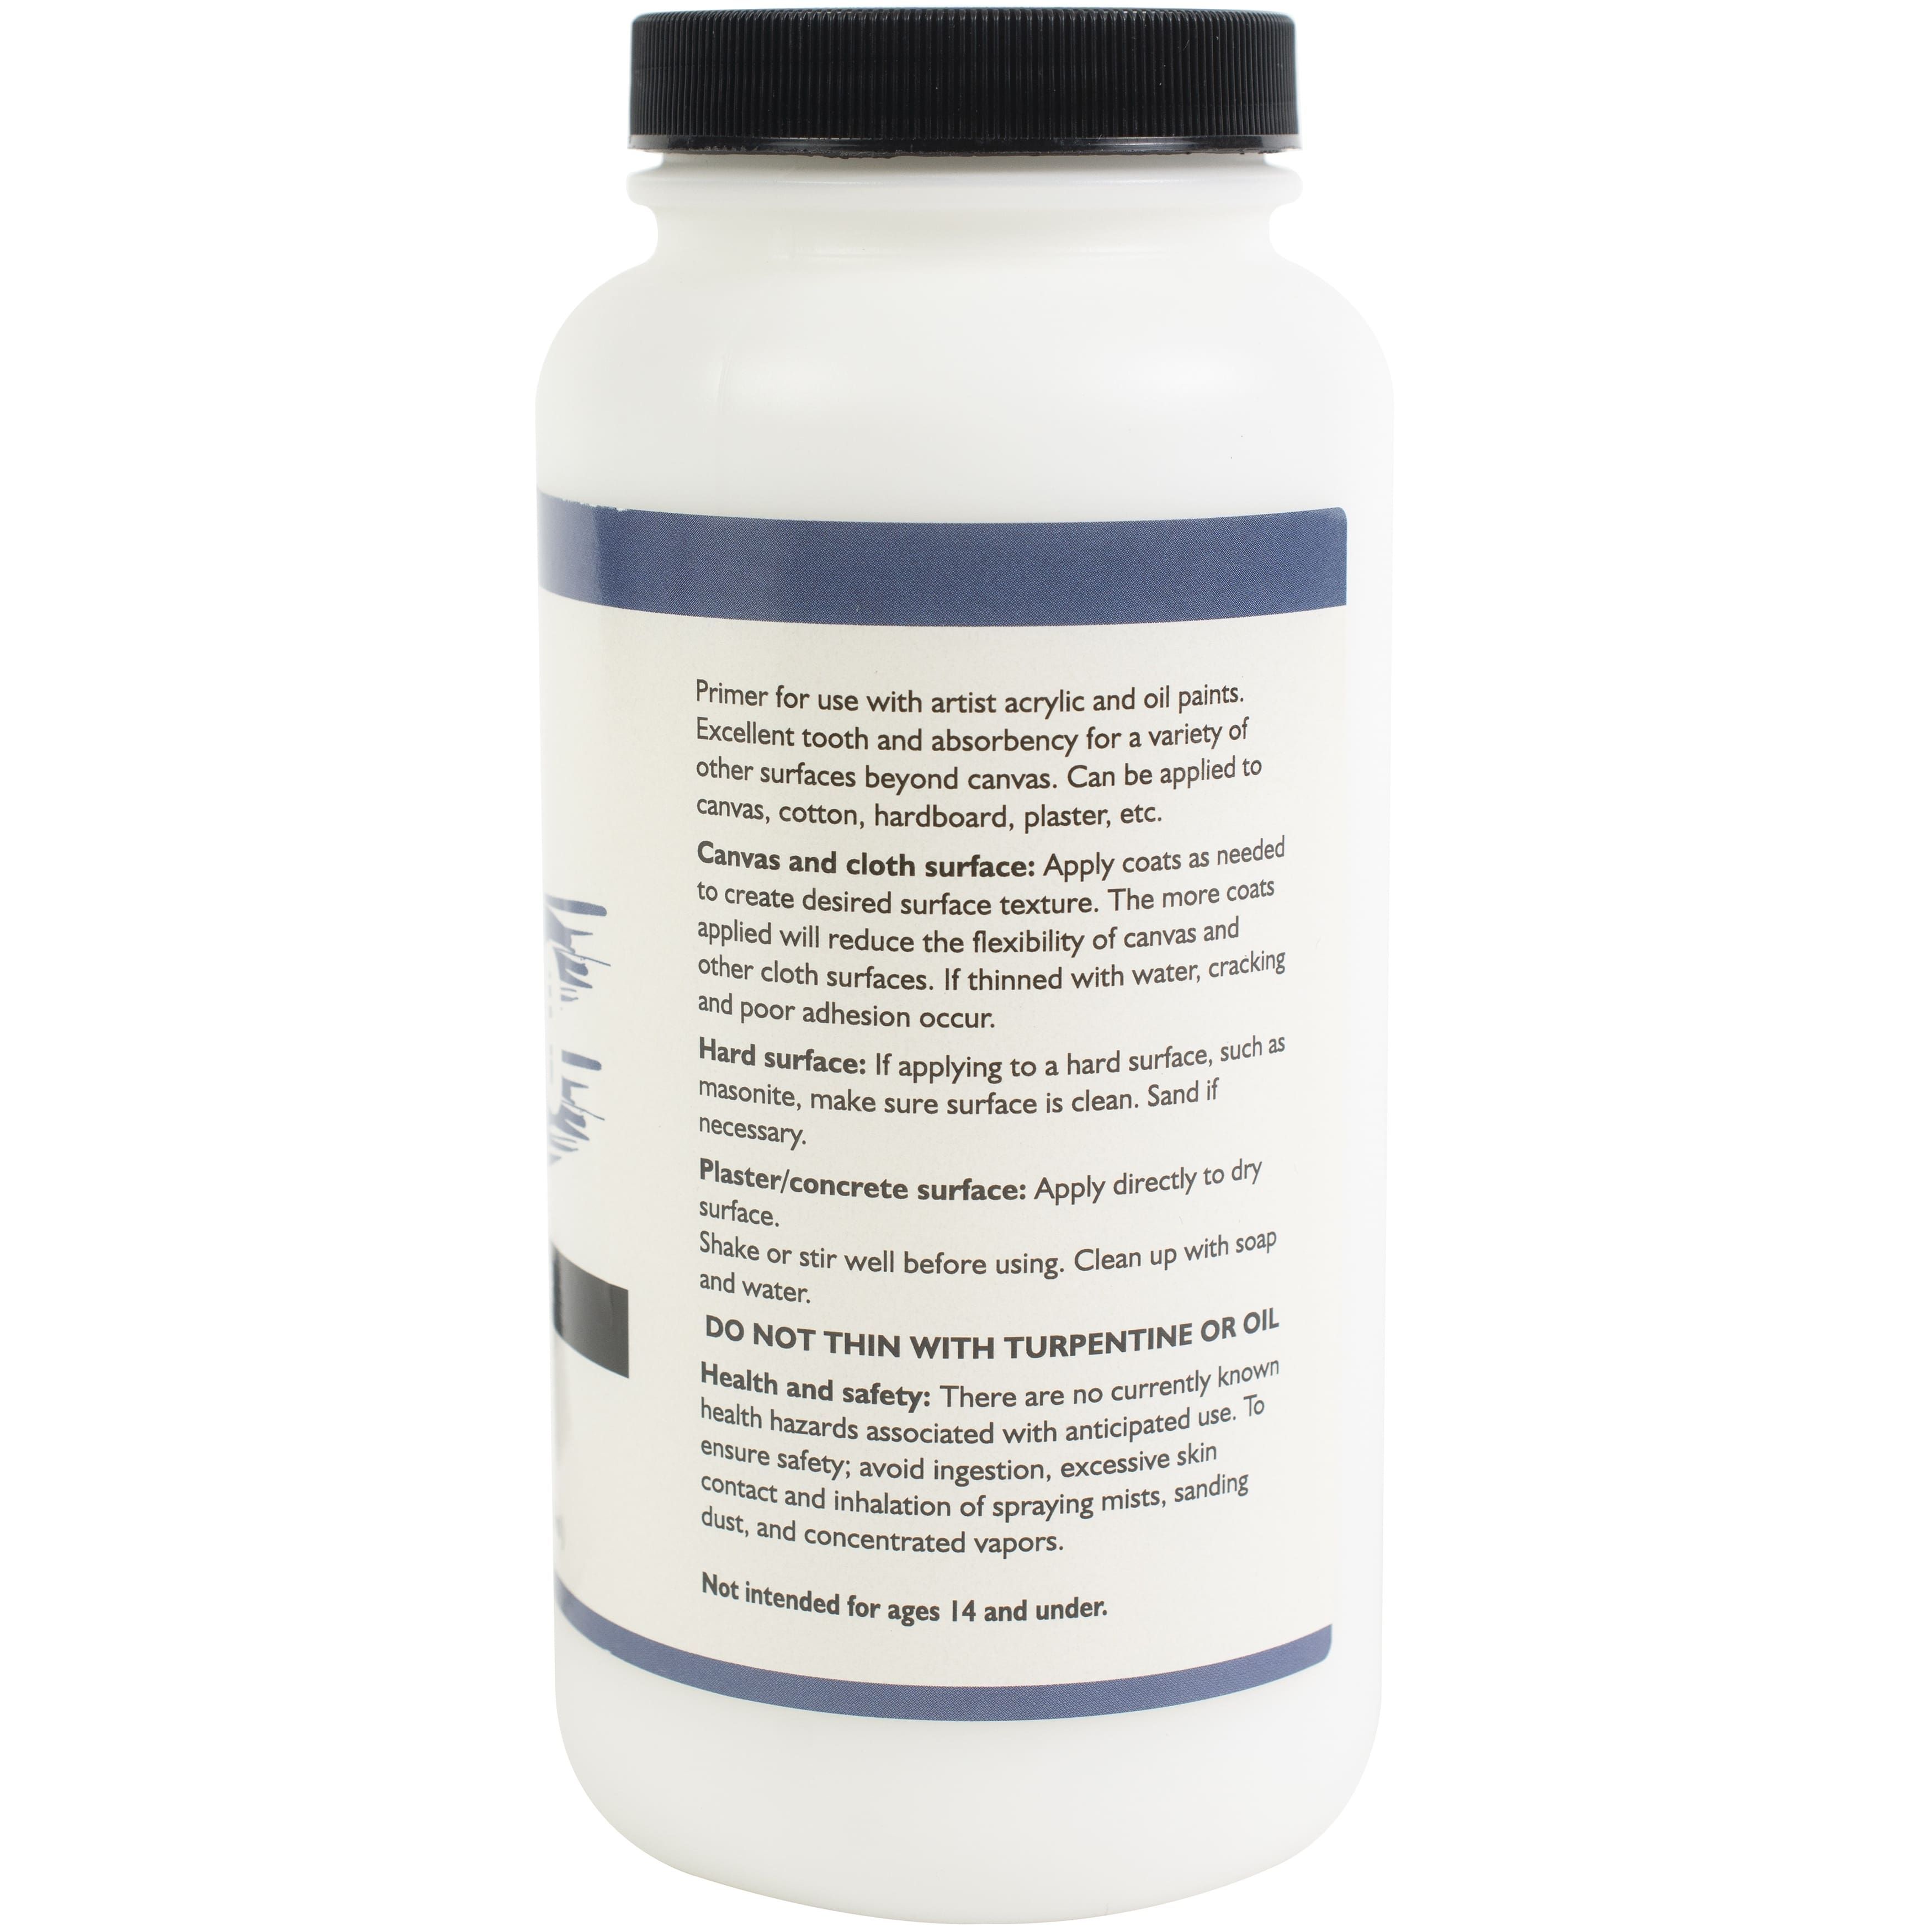  White Gesso Canvas Primer 1 Gallon Give Your Art The Ultimate  Base Prime! Keep Paint from Absorbing! Whether Acrylics, Oils, Watercolors  or Pastels, Make Every Painting Look its Absolute Best 